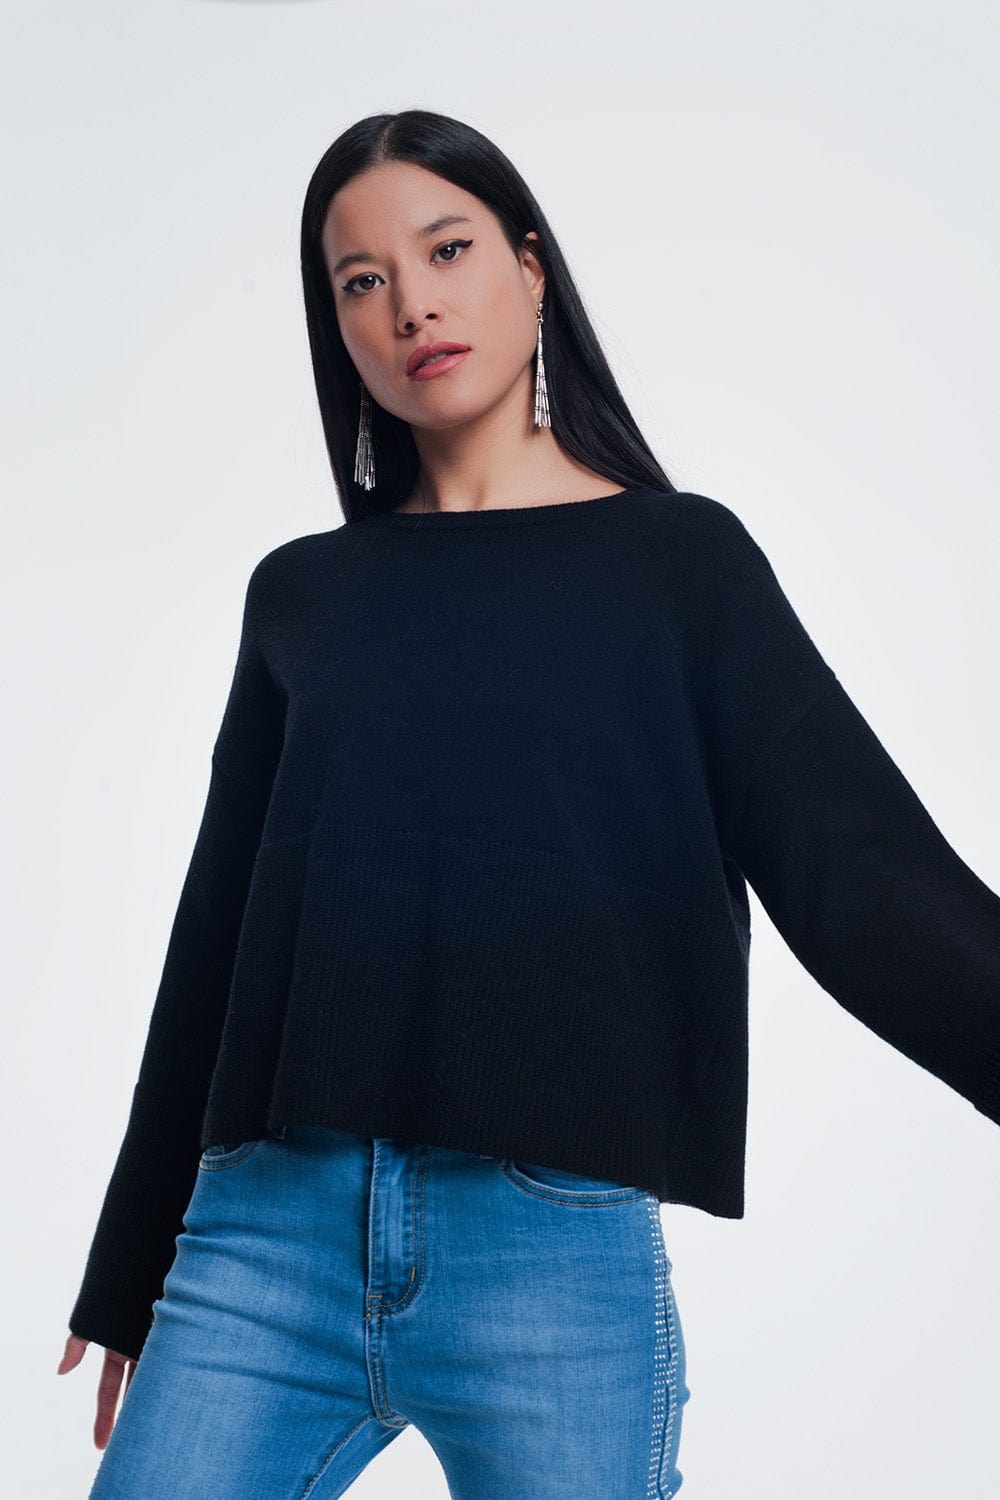 Q2 Women's Sweater Sweater with Long Sleeves in Black